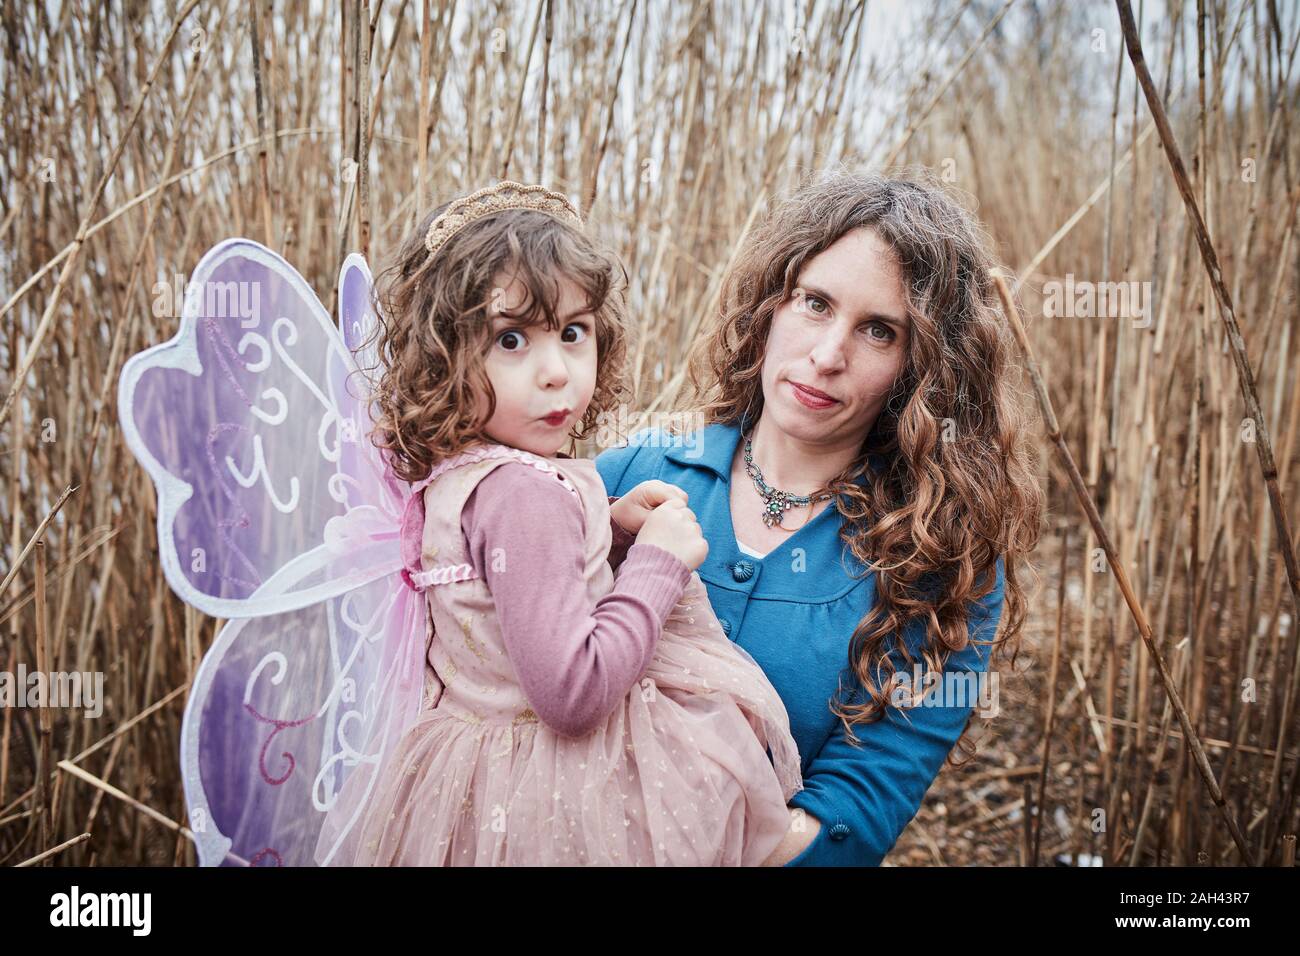 Portrait of mother in nature with her little girl dressed up as a butterfly pulling funny faces Stock Photo